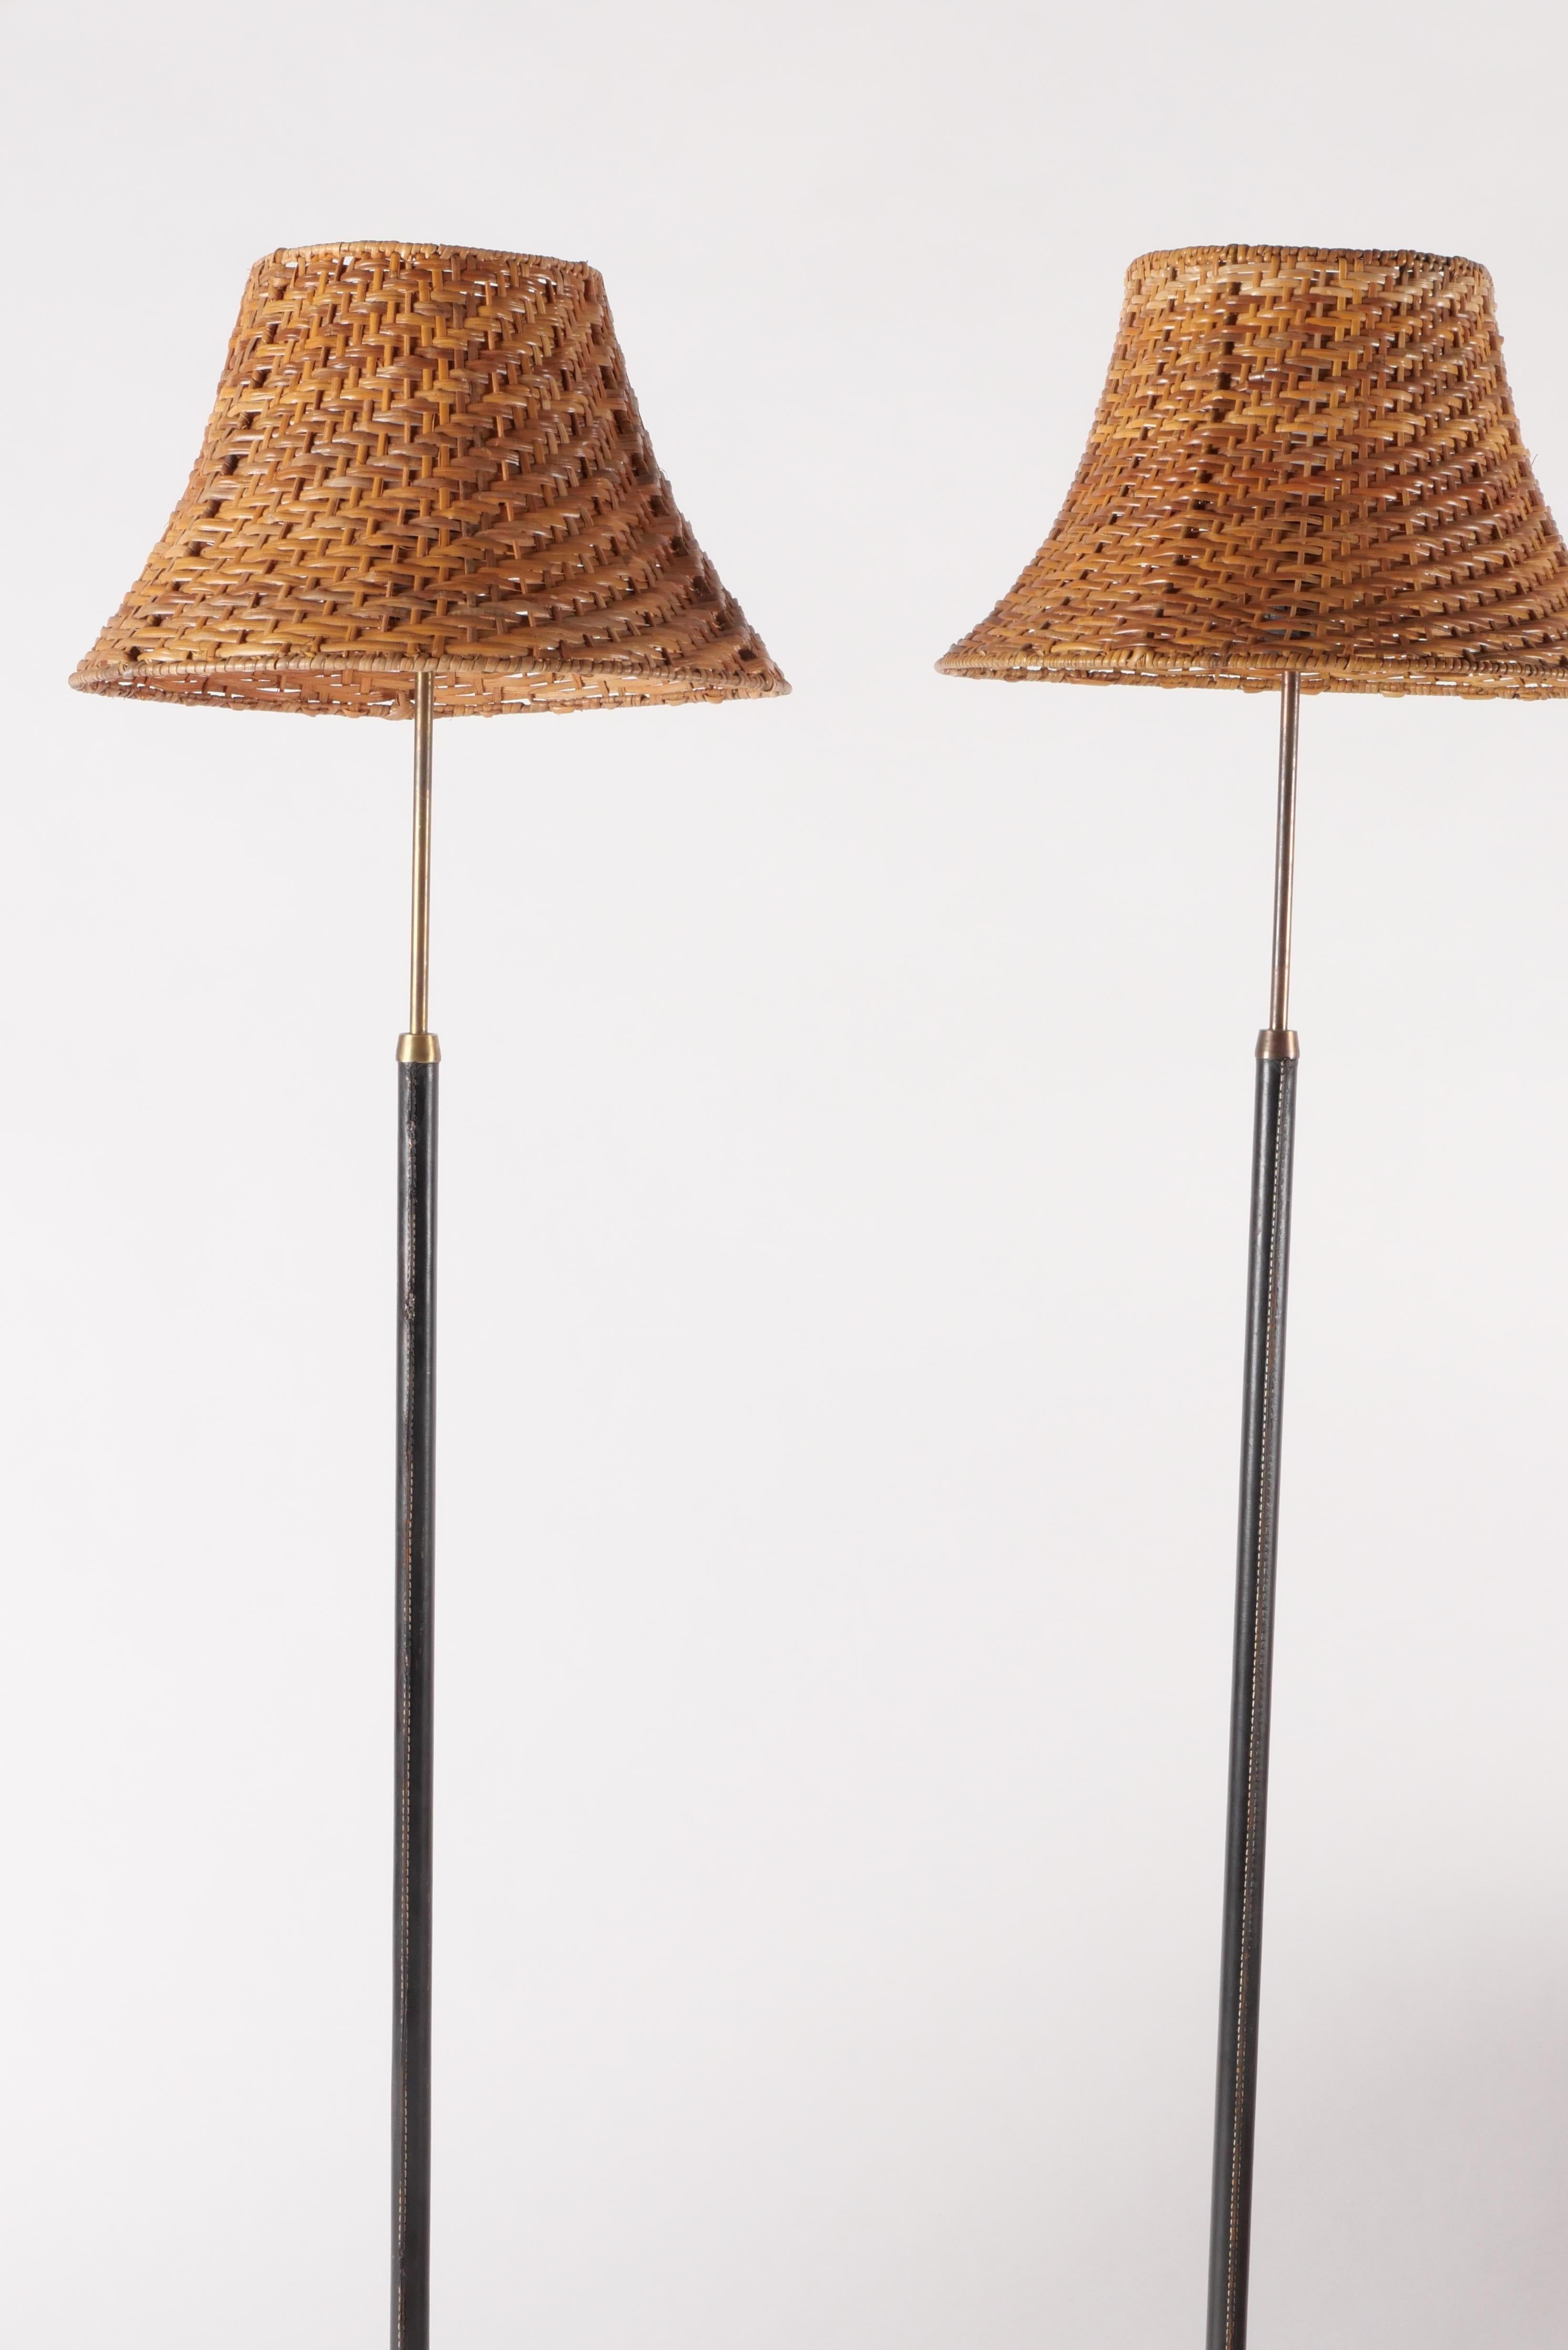 20th Century ASEA Sweden Brass, Leather & Rattan Floor Lamps, A Pair For Sale